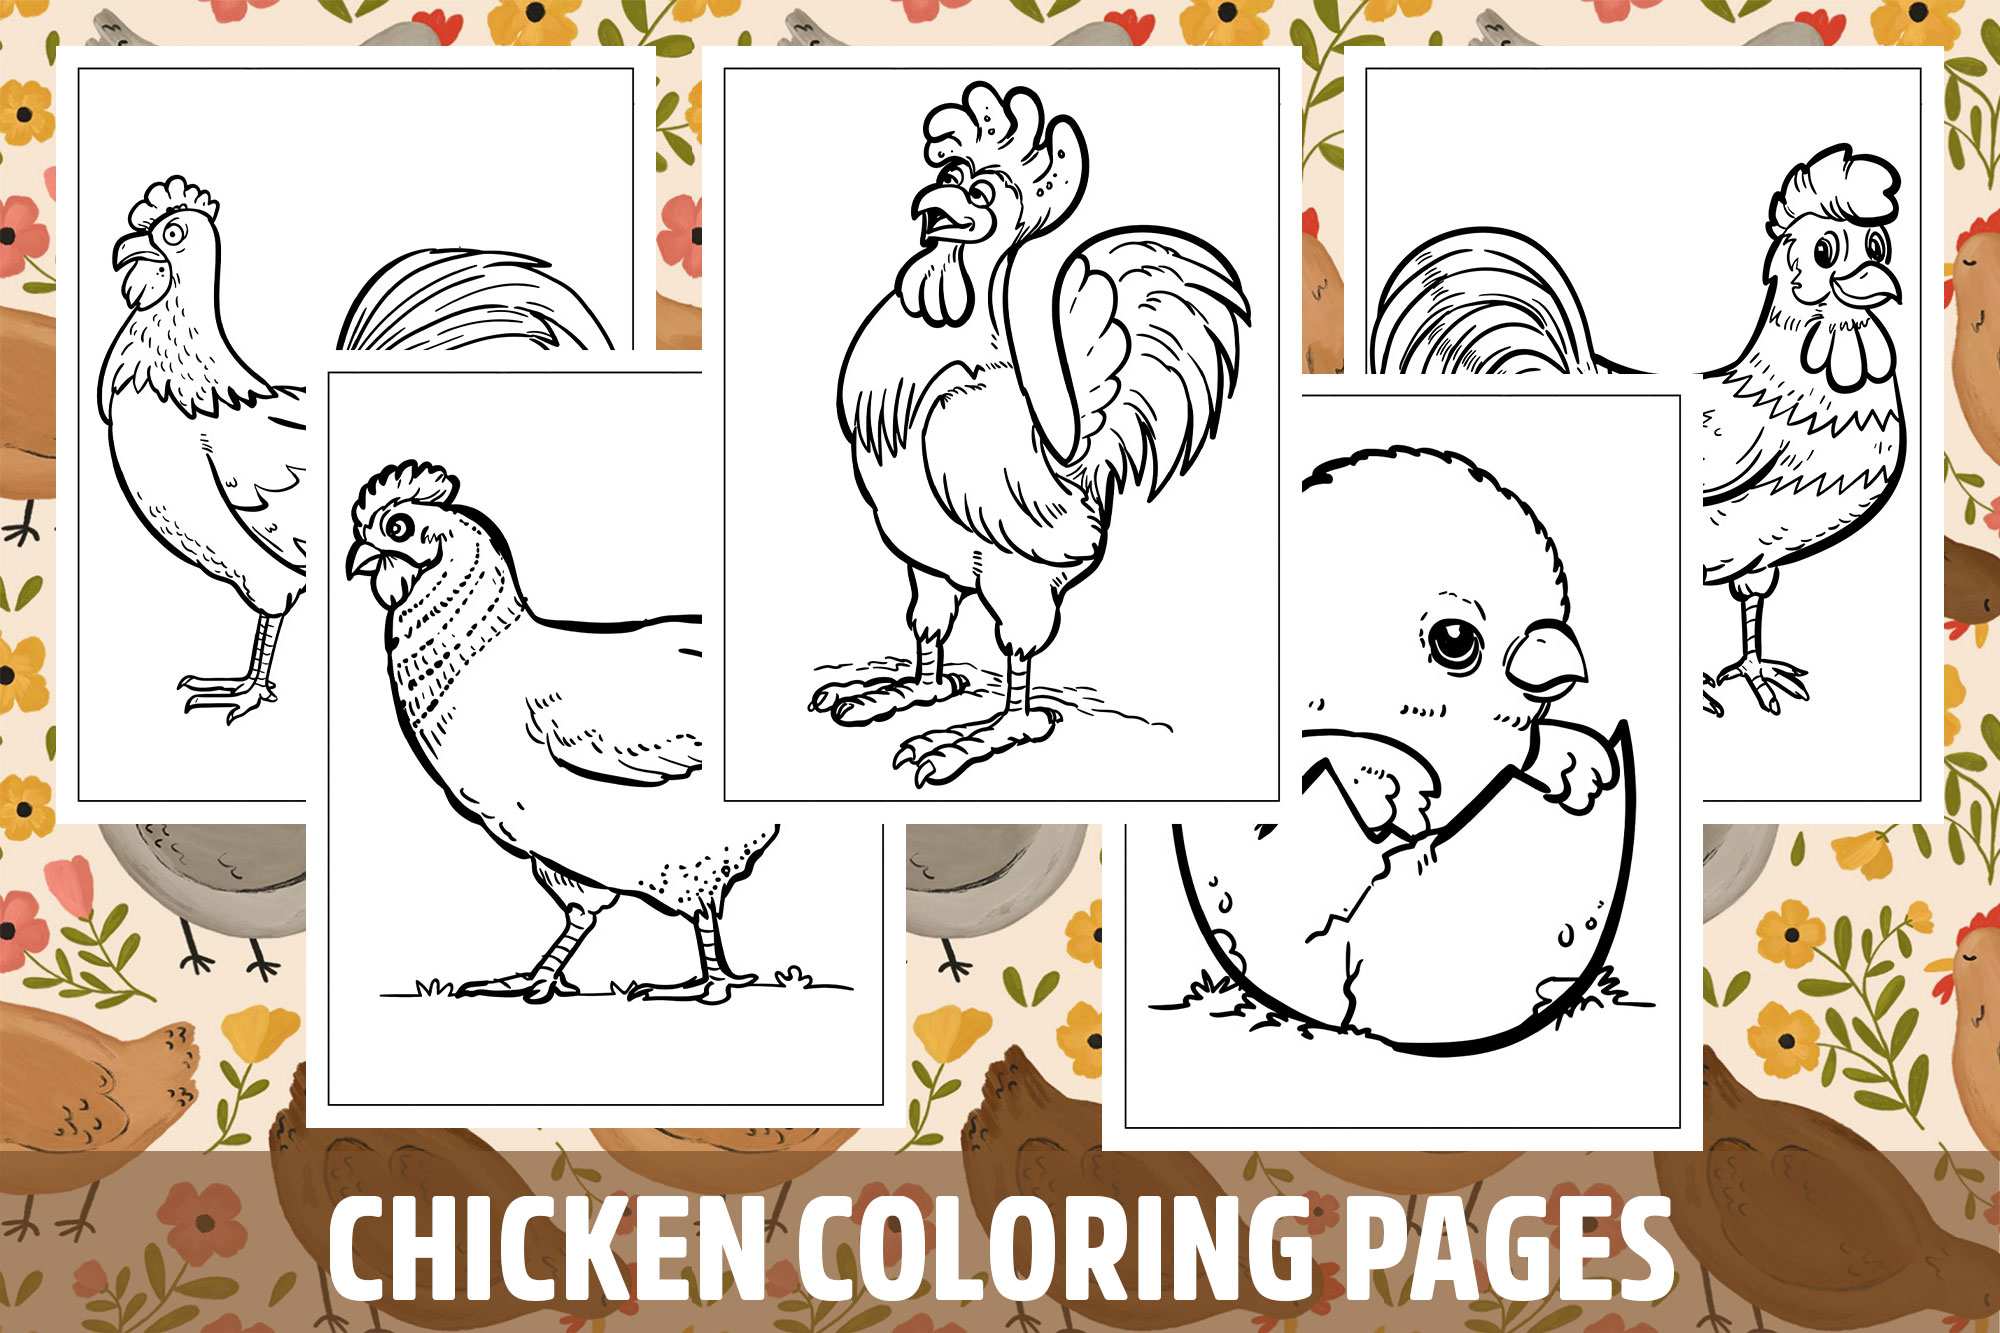 Chicken coloring pages for kids girls boys teens birthday school activity made by teachers